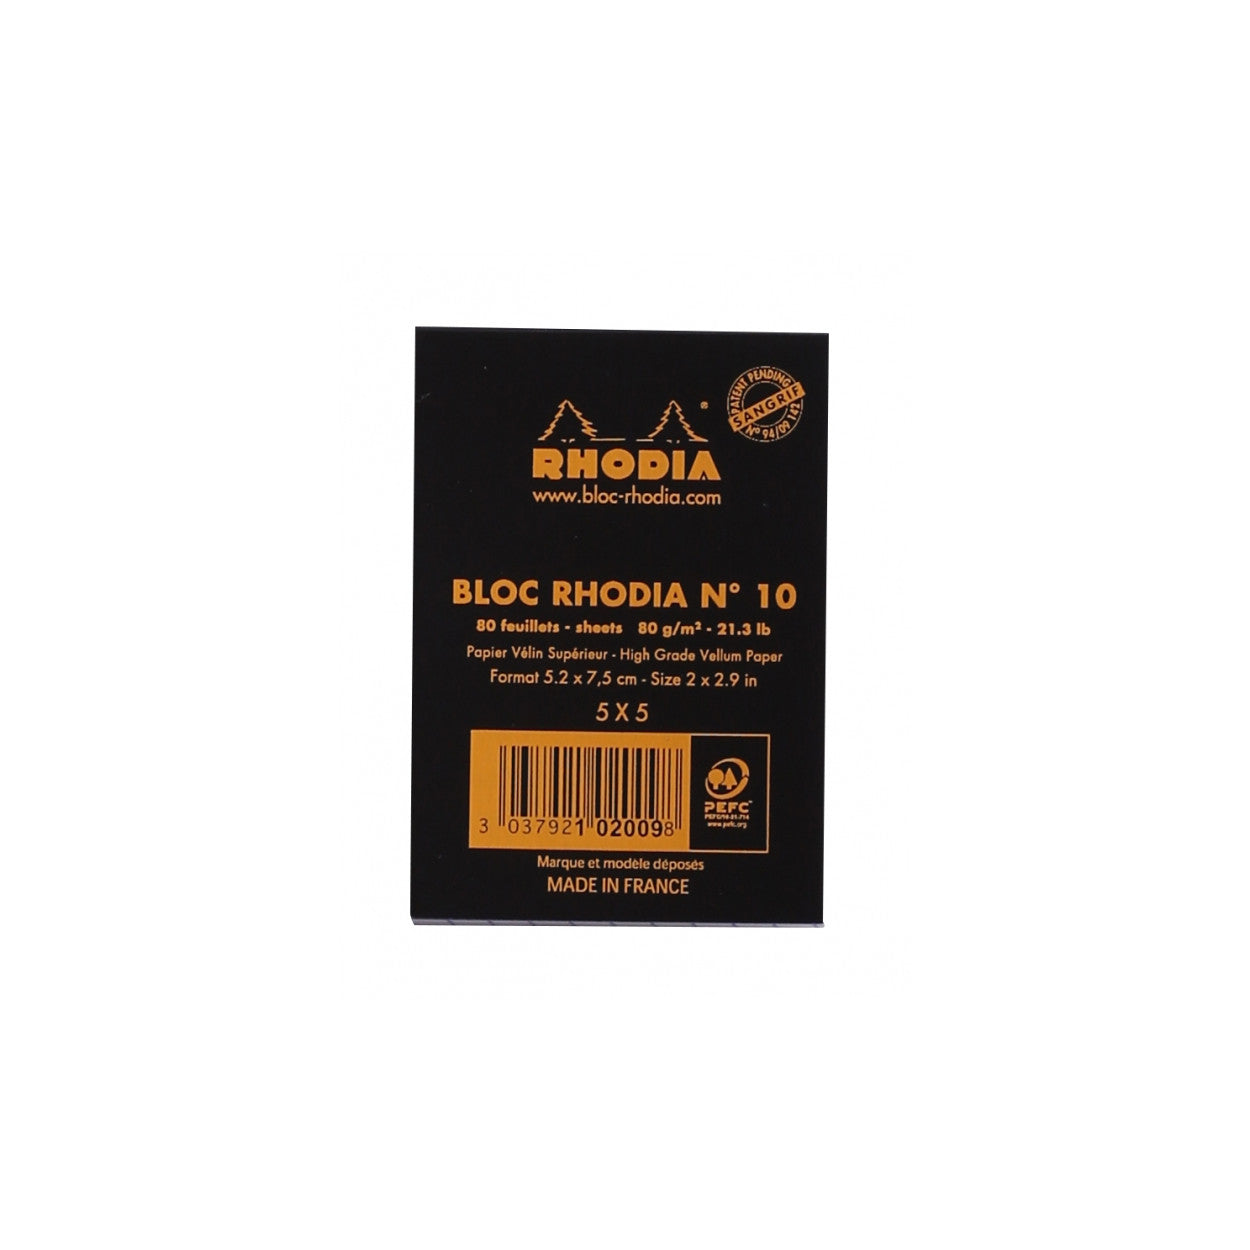 Rhodia Staplebound Notepad - Graph 80 sheets - 2 x 3 - Black cover | Atlas Stationers.